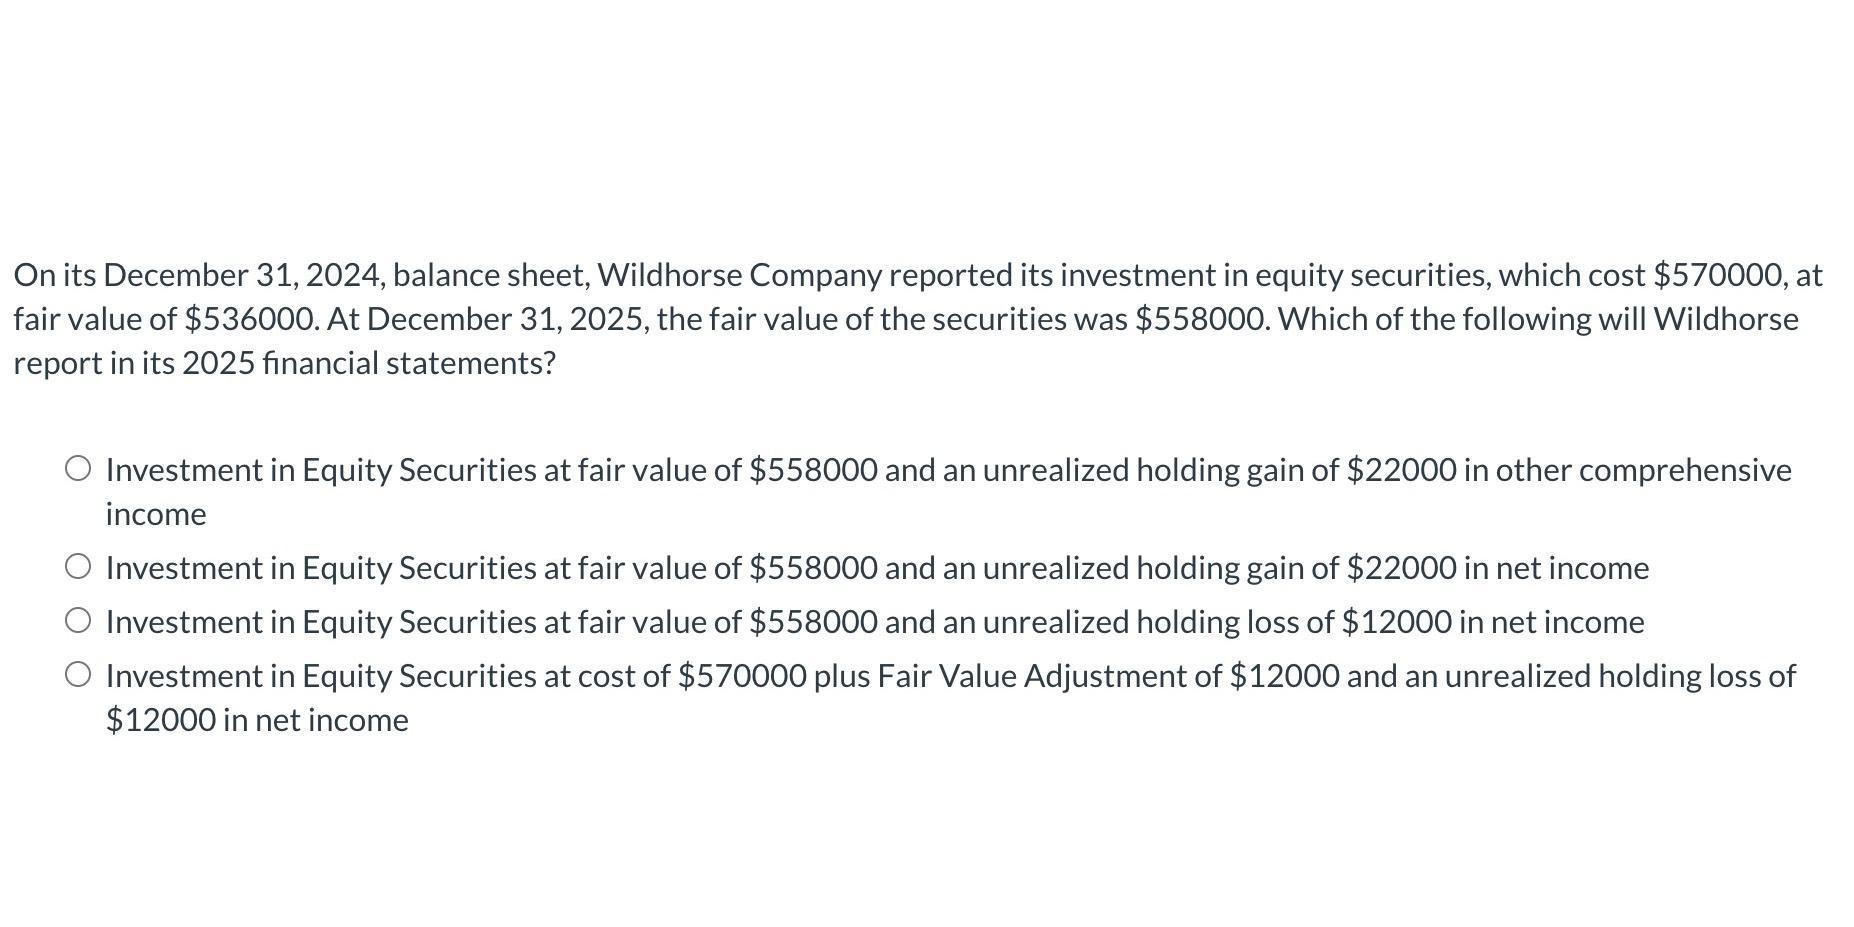 On its December 31, 2024, balance sheet, Wildhorse Company reported its investment in equity securities,